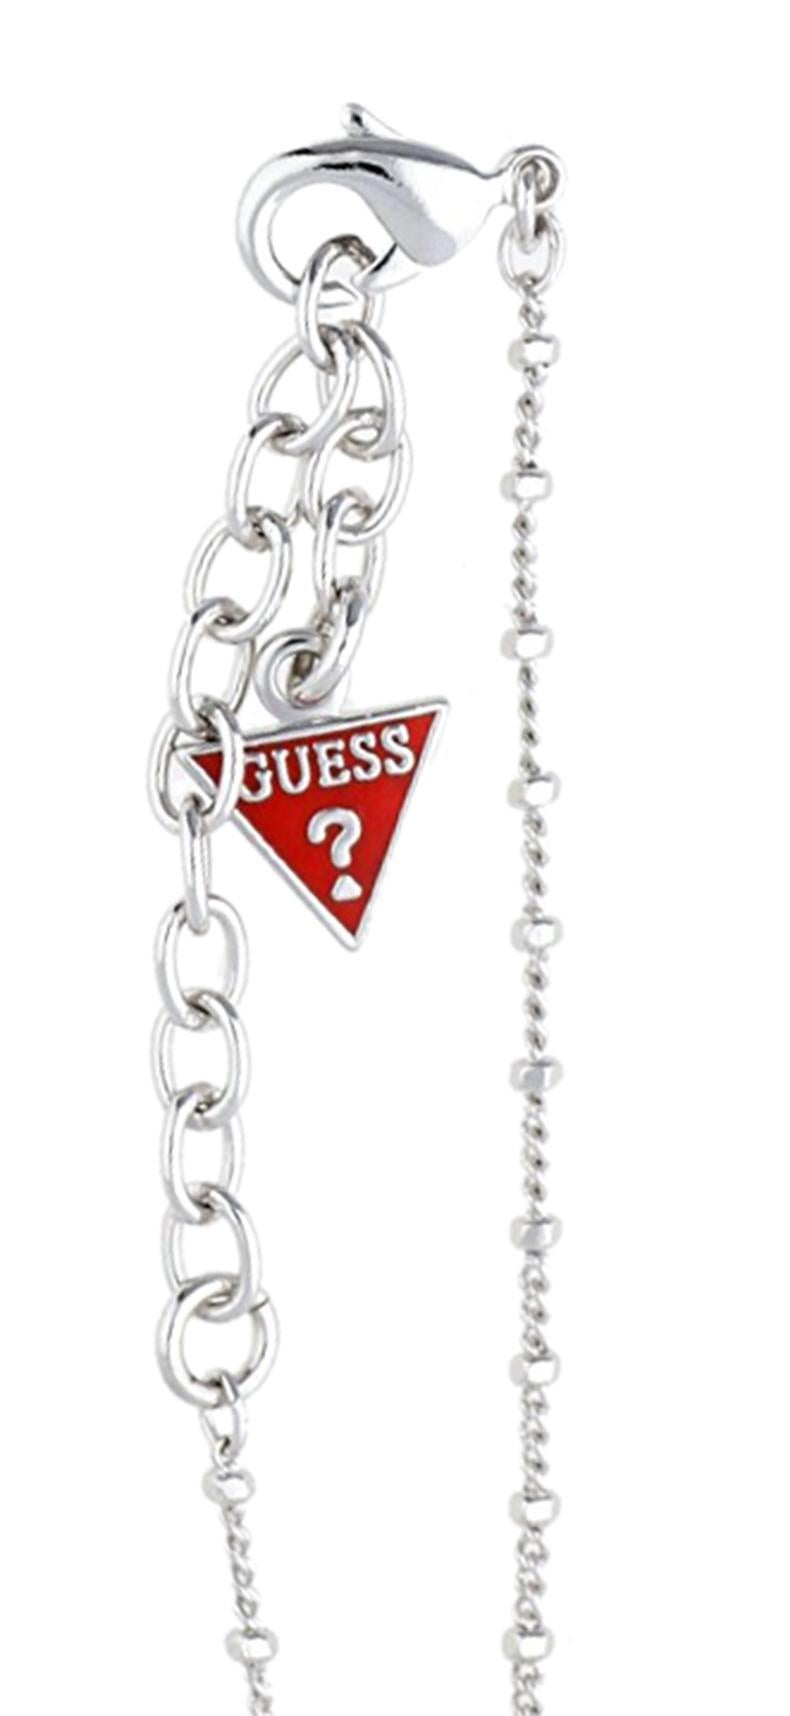 Item number: UBN81031
material: metal
length 40 cm-45 cm
width 0,2 cm
Pendant Material: metal-Swarovski crystal
Pendant dimenions length: 1,8 cm, width: 1,3 cm
Color: silver
Clasp: lobster clasp
Weight net 8
Delivery: in Guess Jewelry pouch


